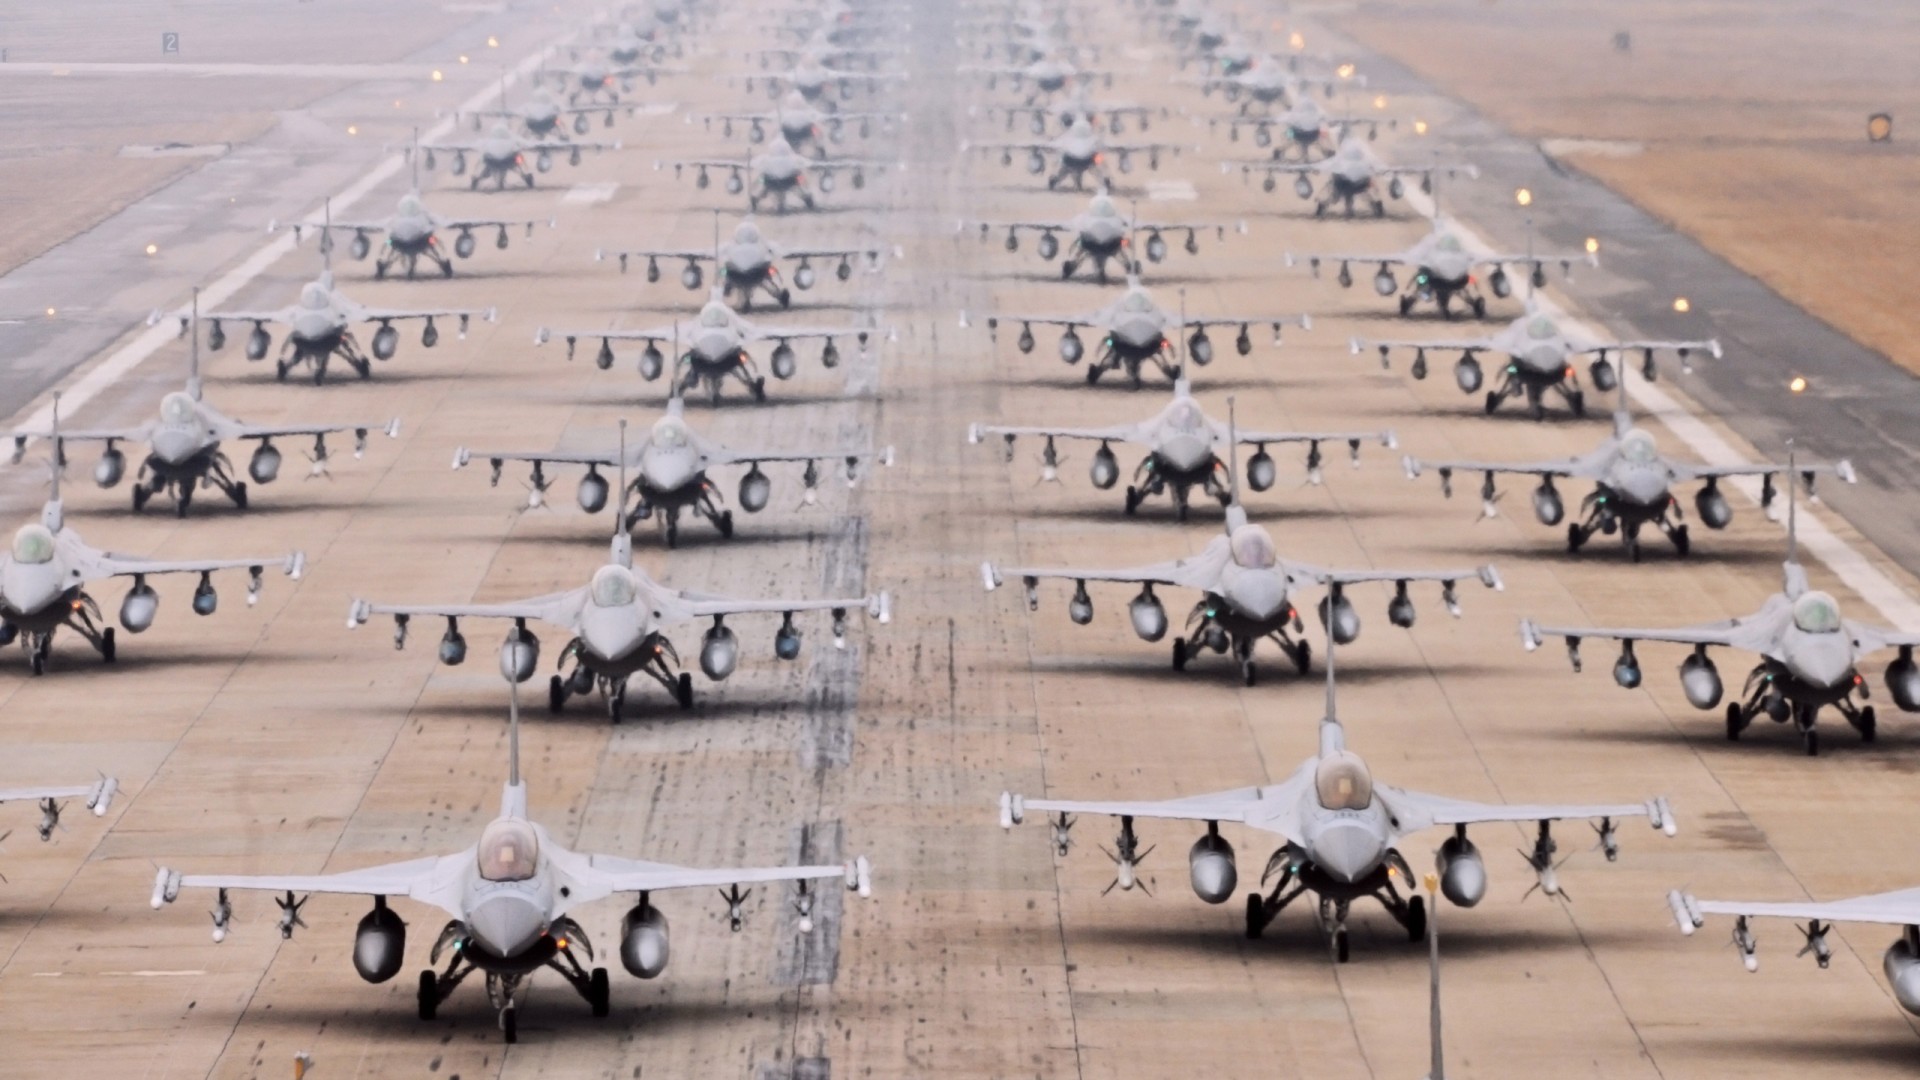 Jet Fighter Airport General Dynamics F 16 Fighting Falcon Runway Jet Fighter Military Military Aircr 1920x1080